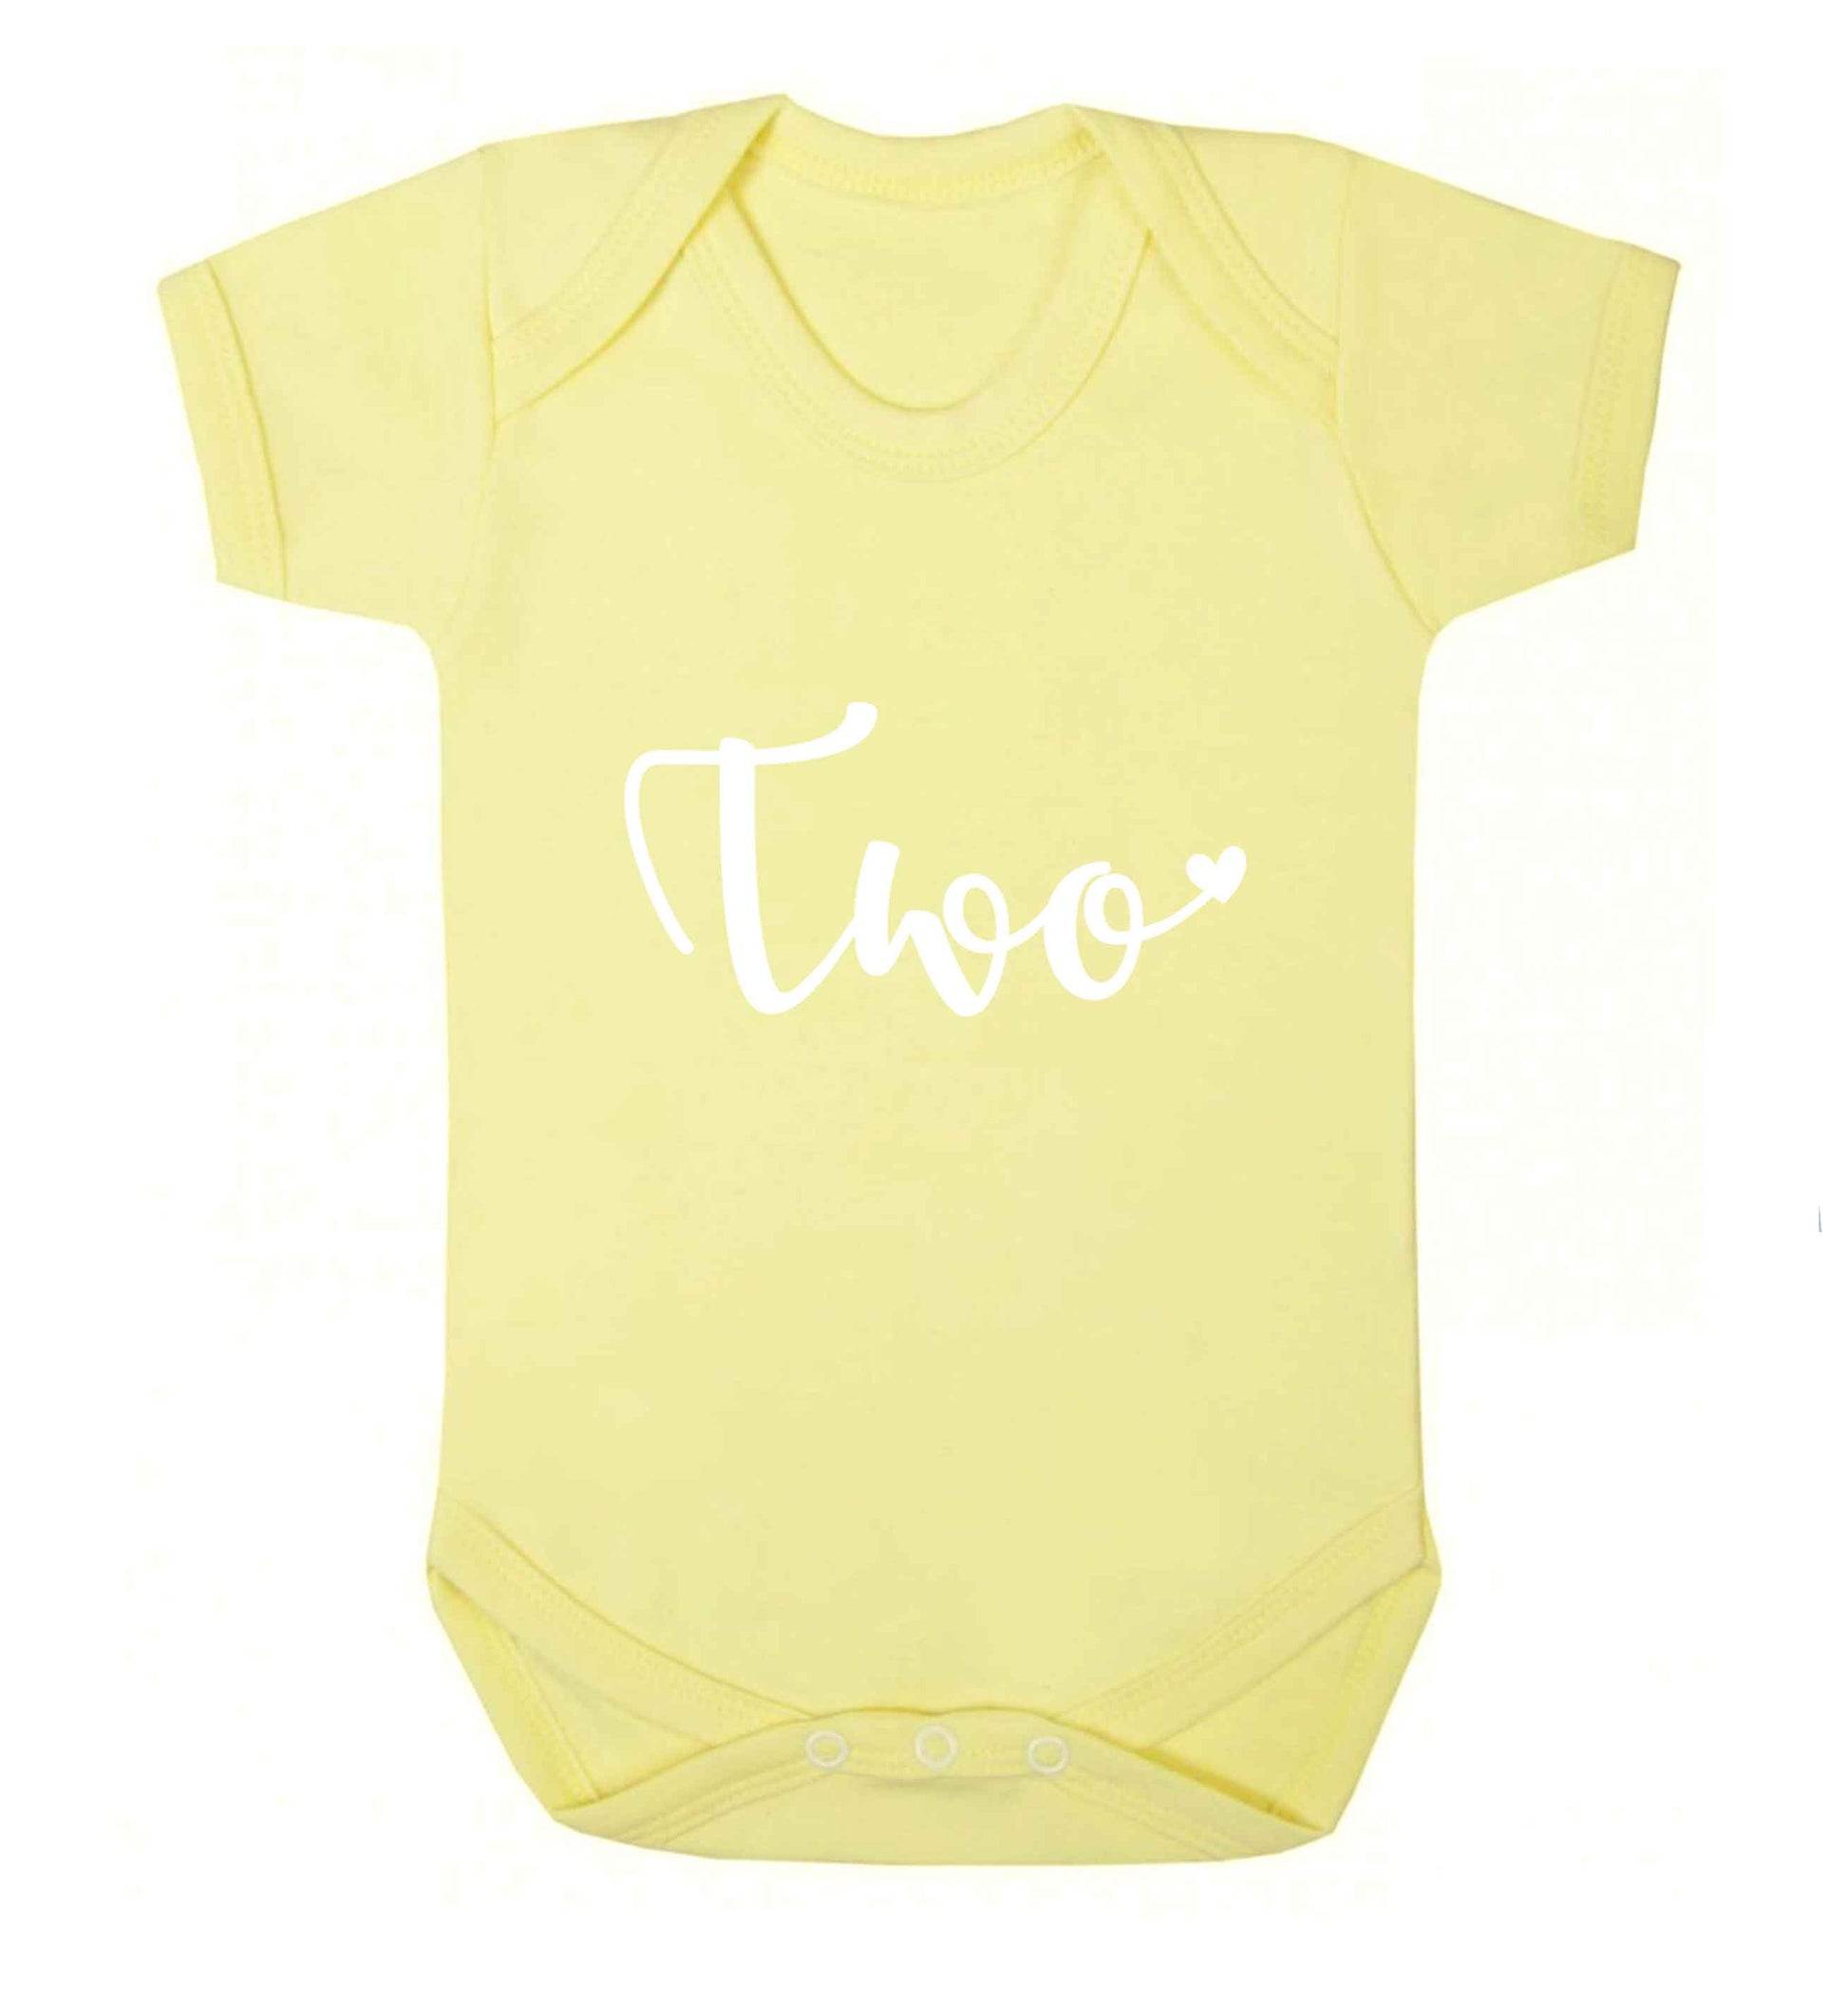 Two and Heart baby vest pale yellow 18-24 months